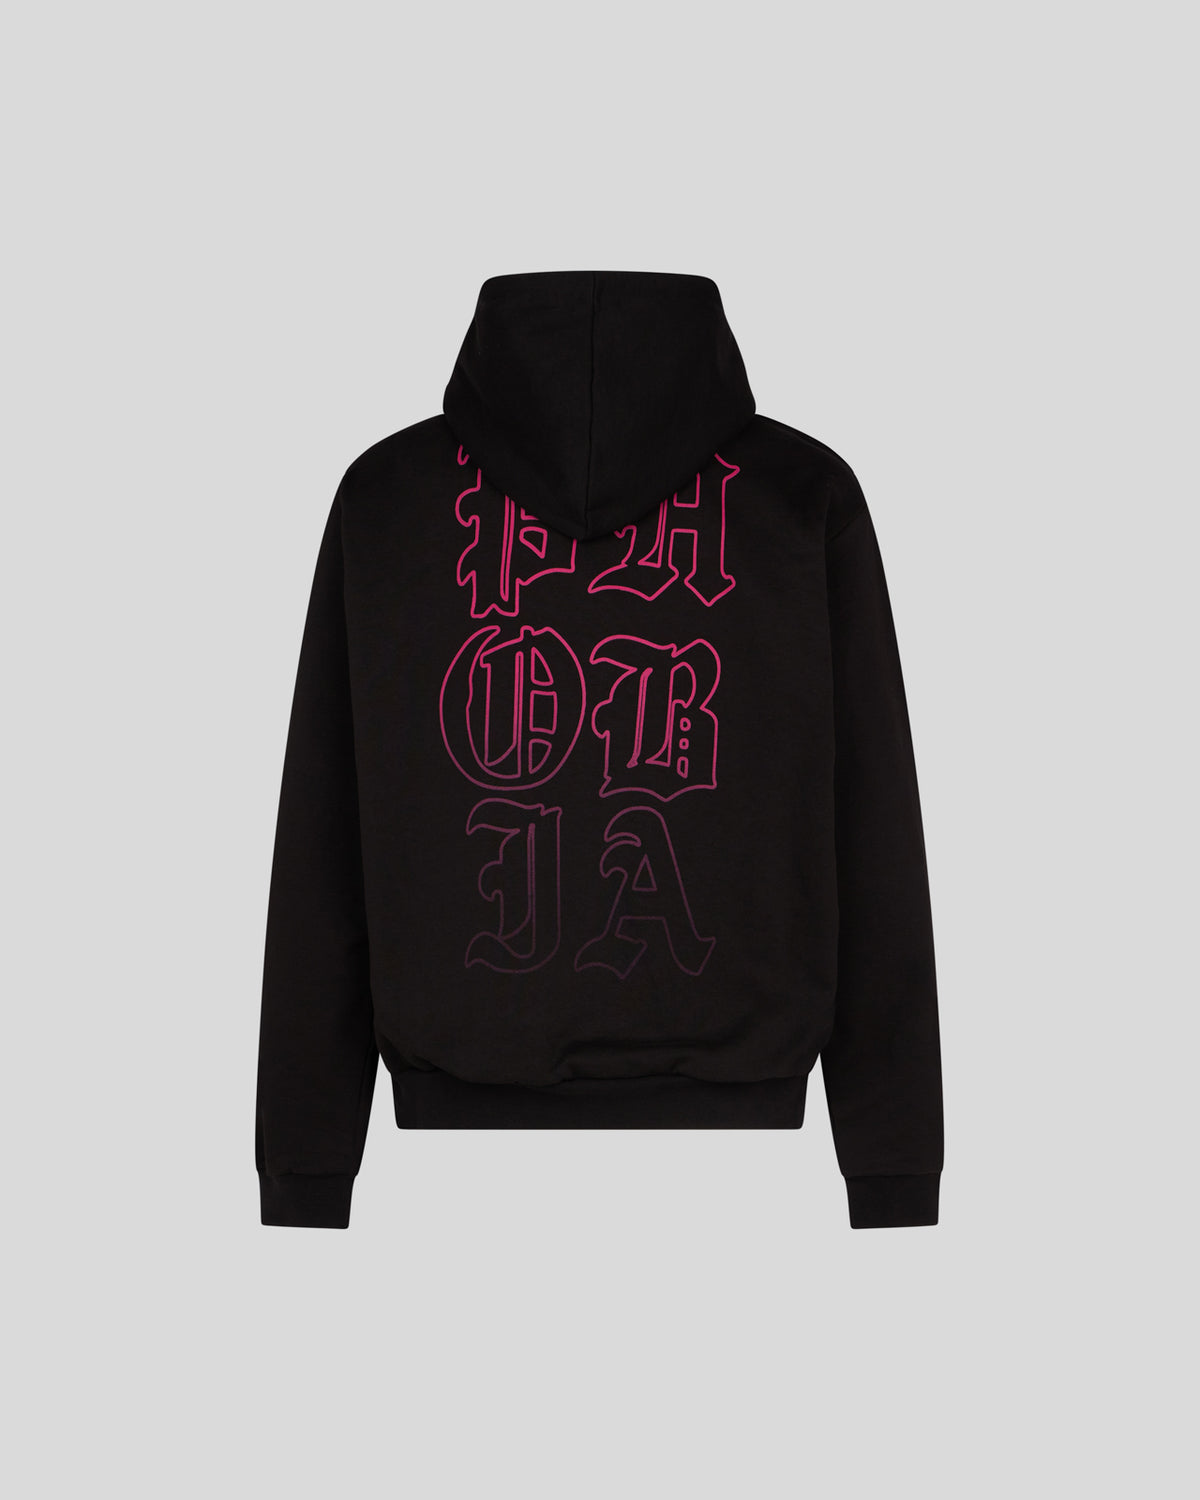 PHOBIA BLACK HOODIE WITH PINK MOUTH PRINT